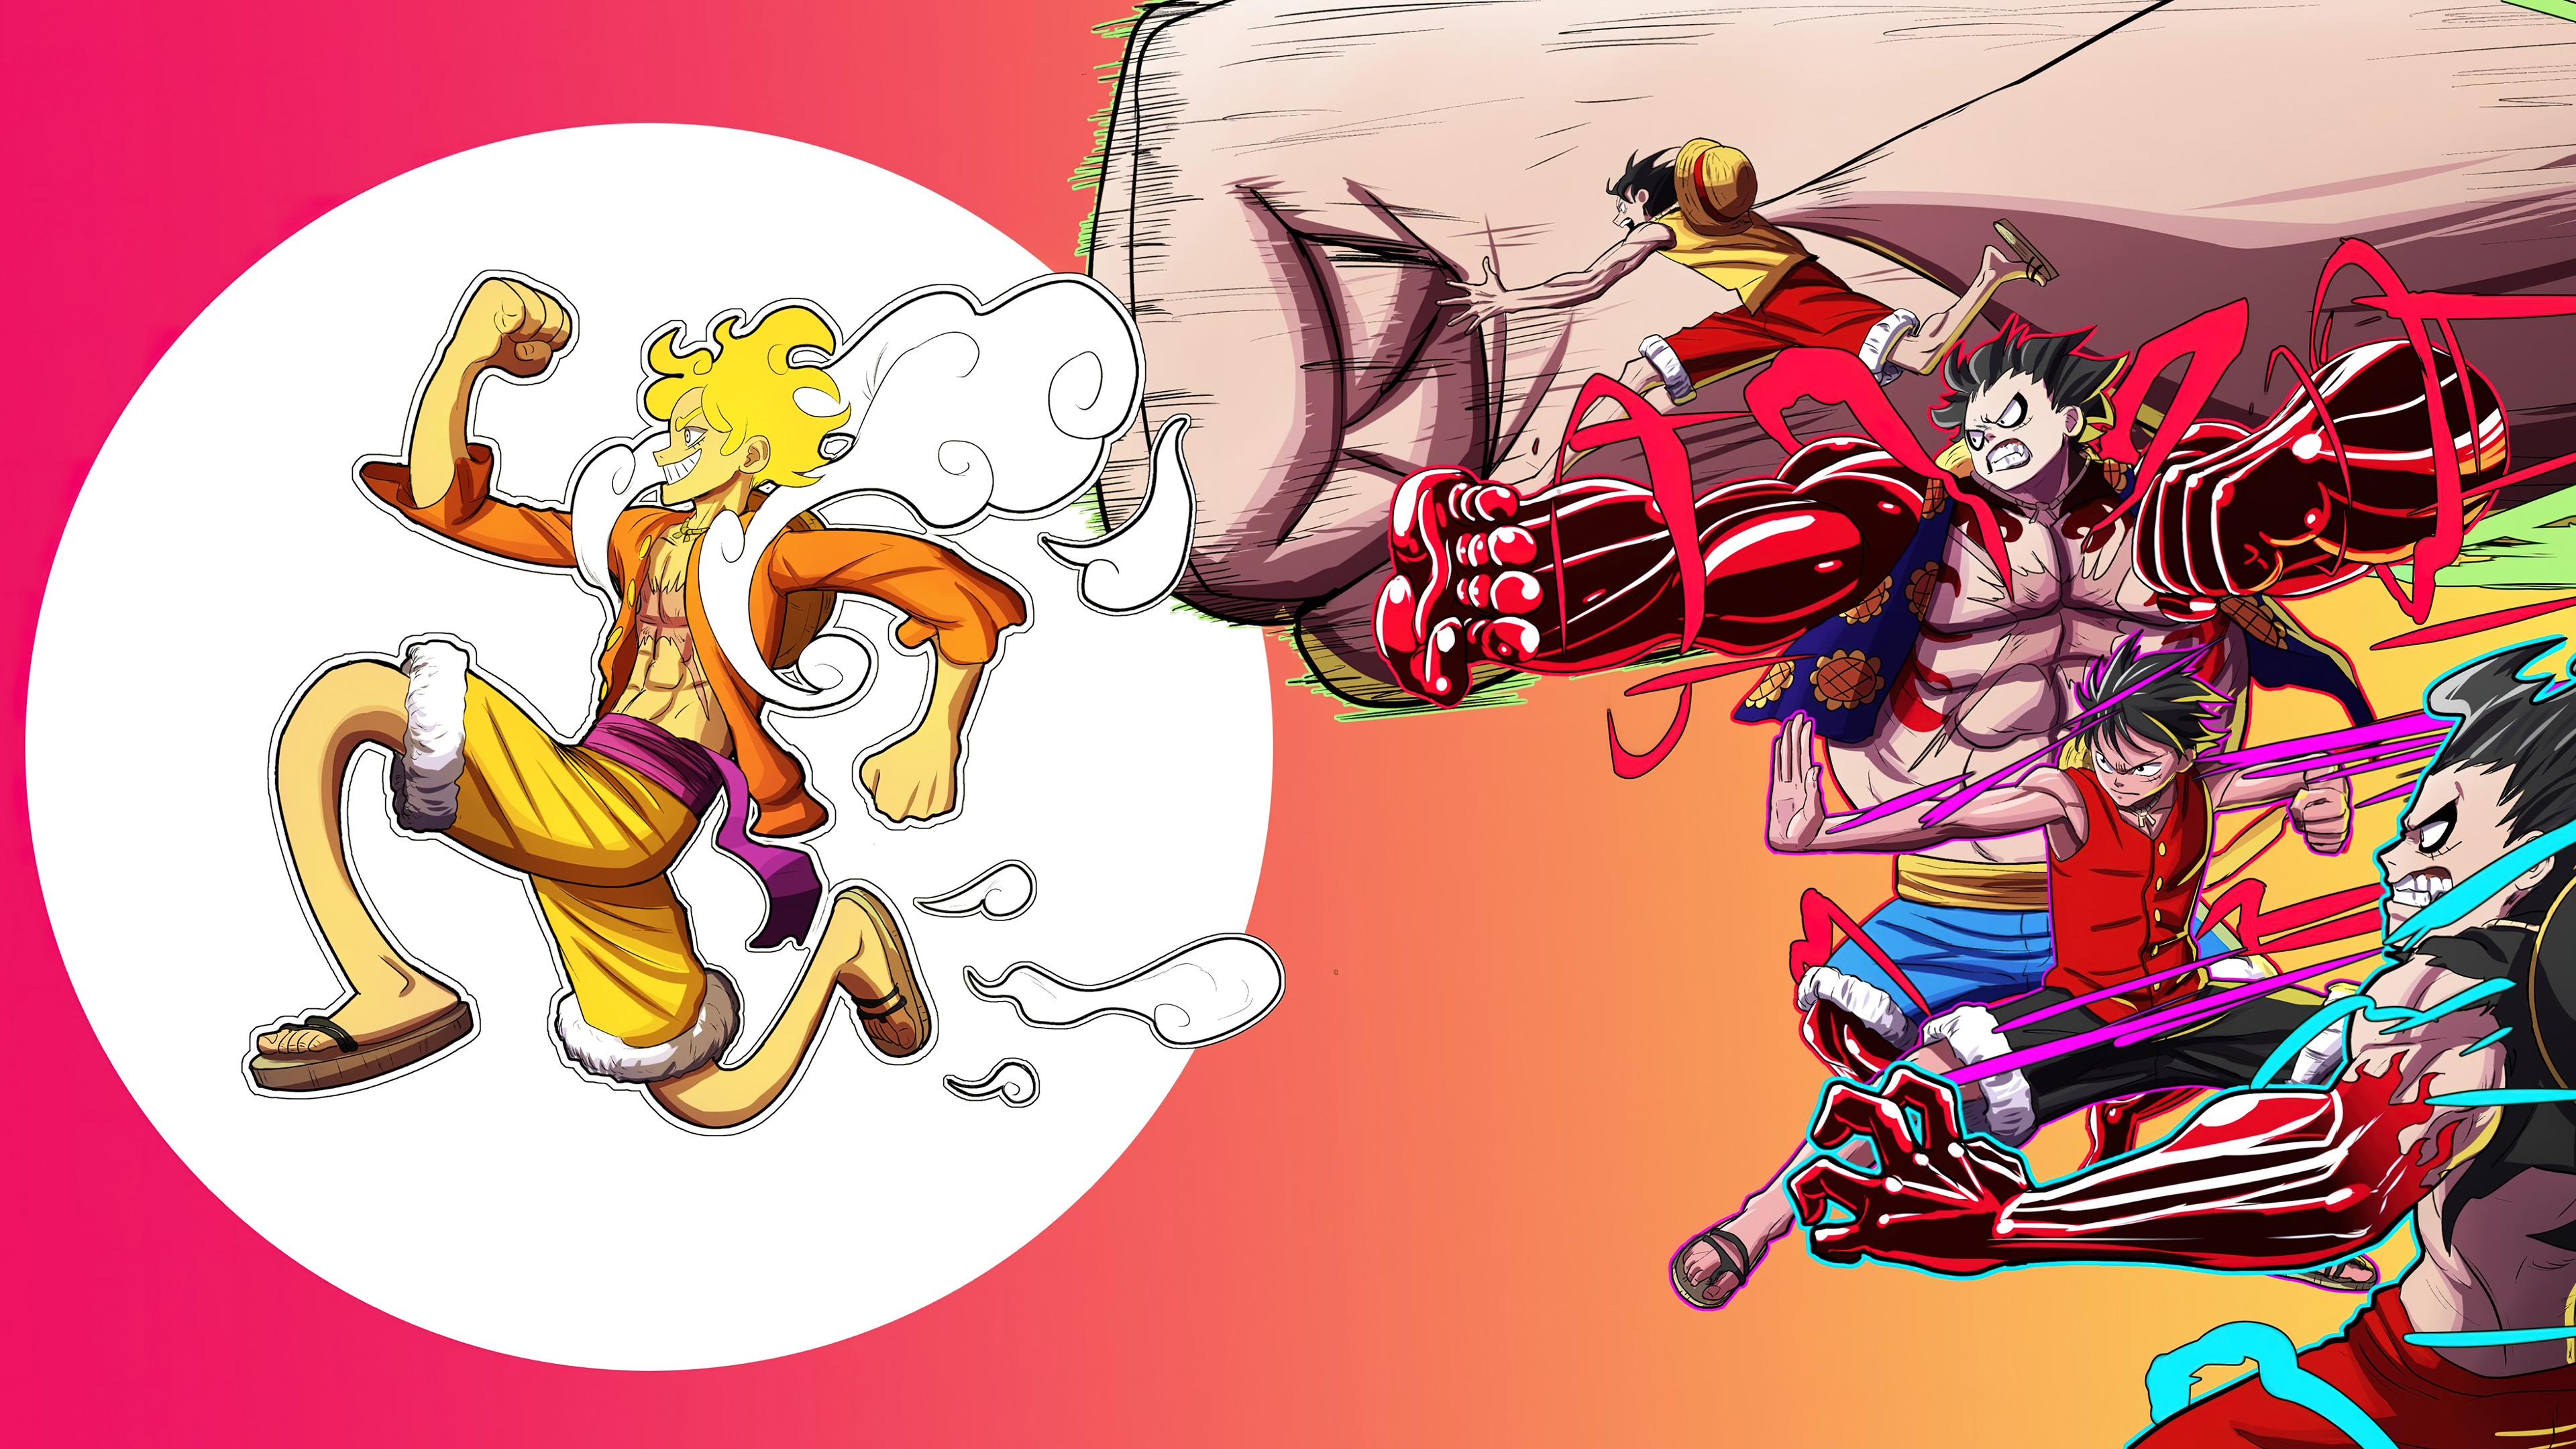 750+ 4K Anime One Piece Wallpapers | Background Images